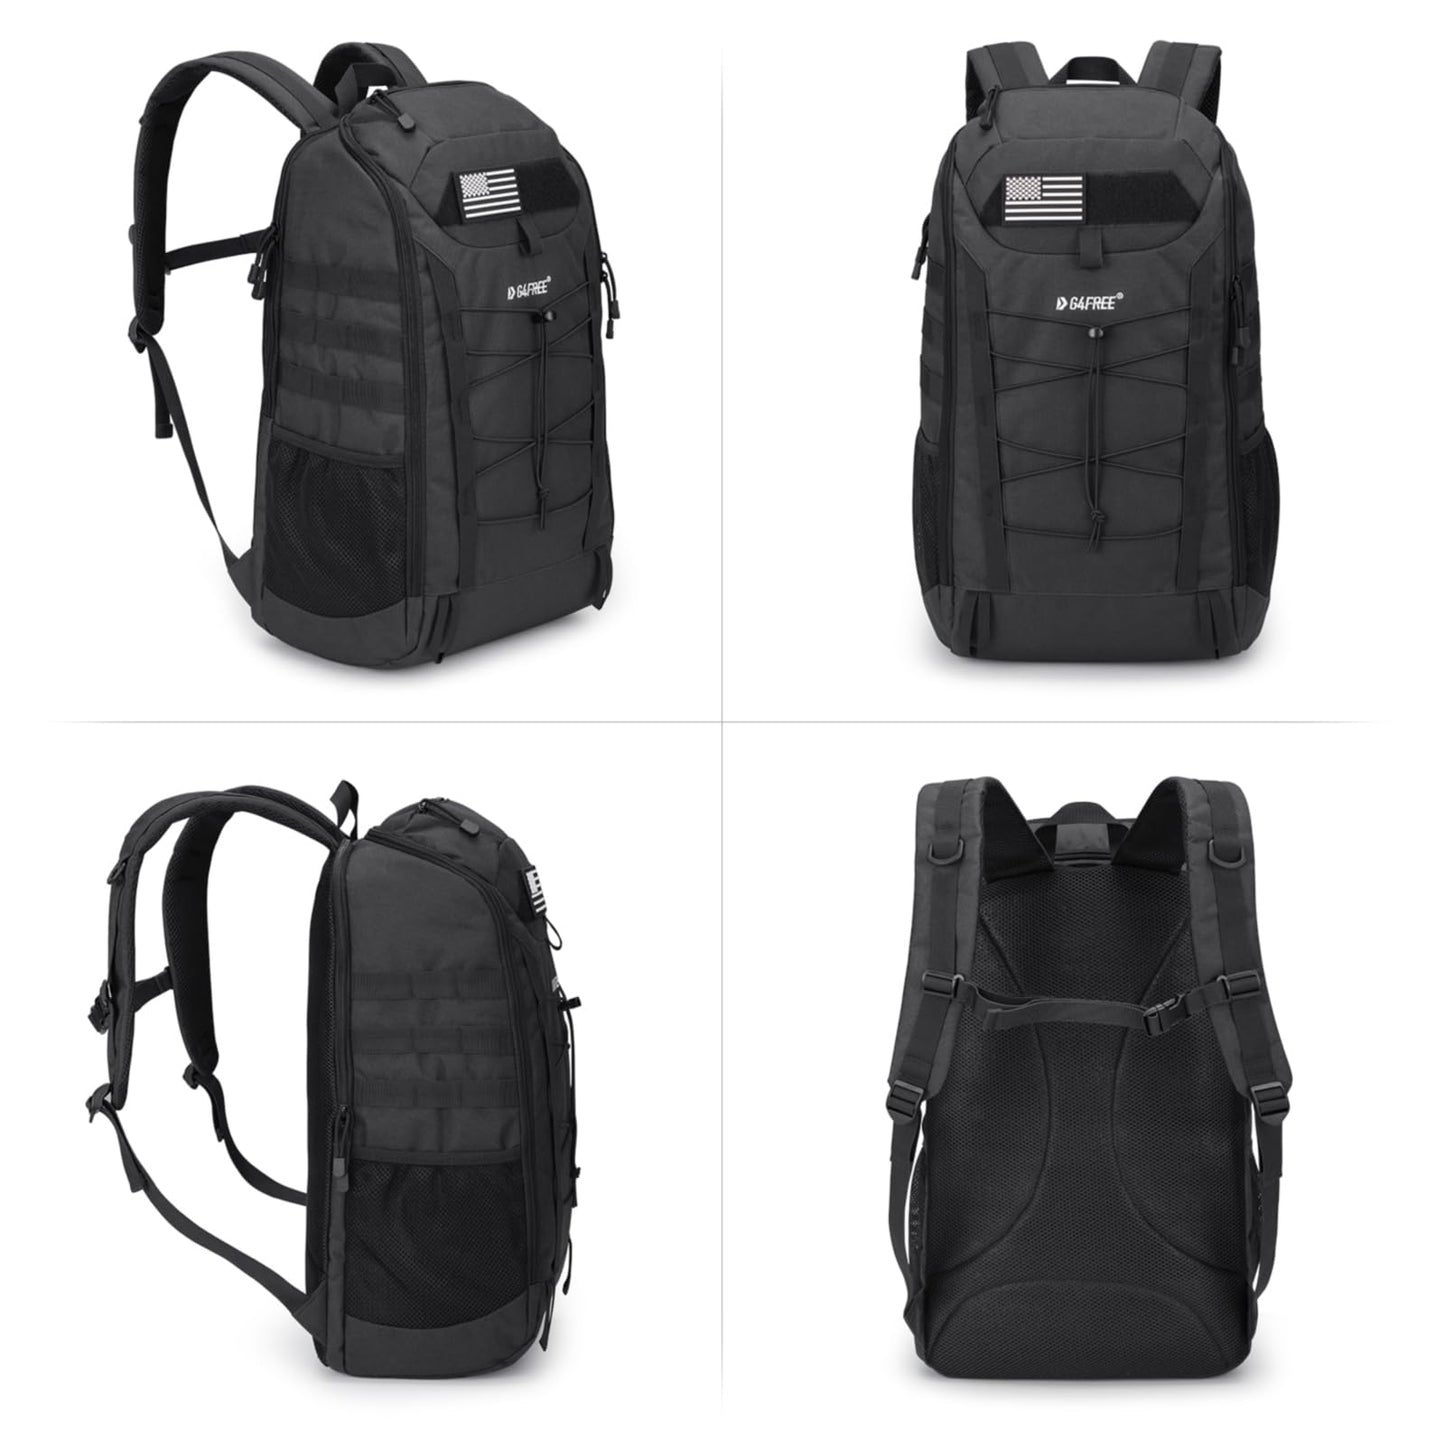 G4Free 45L Military Tactical Backpack